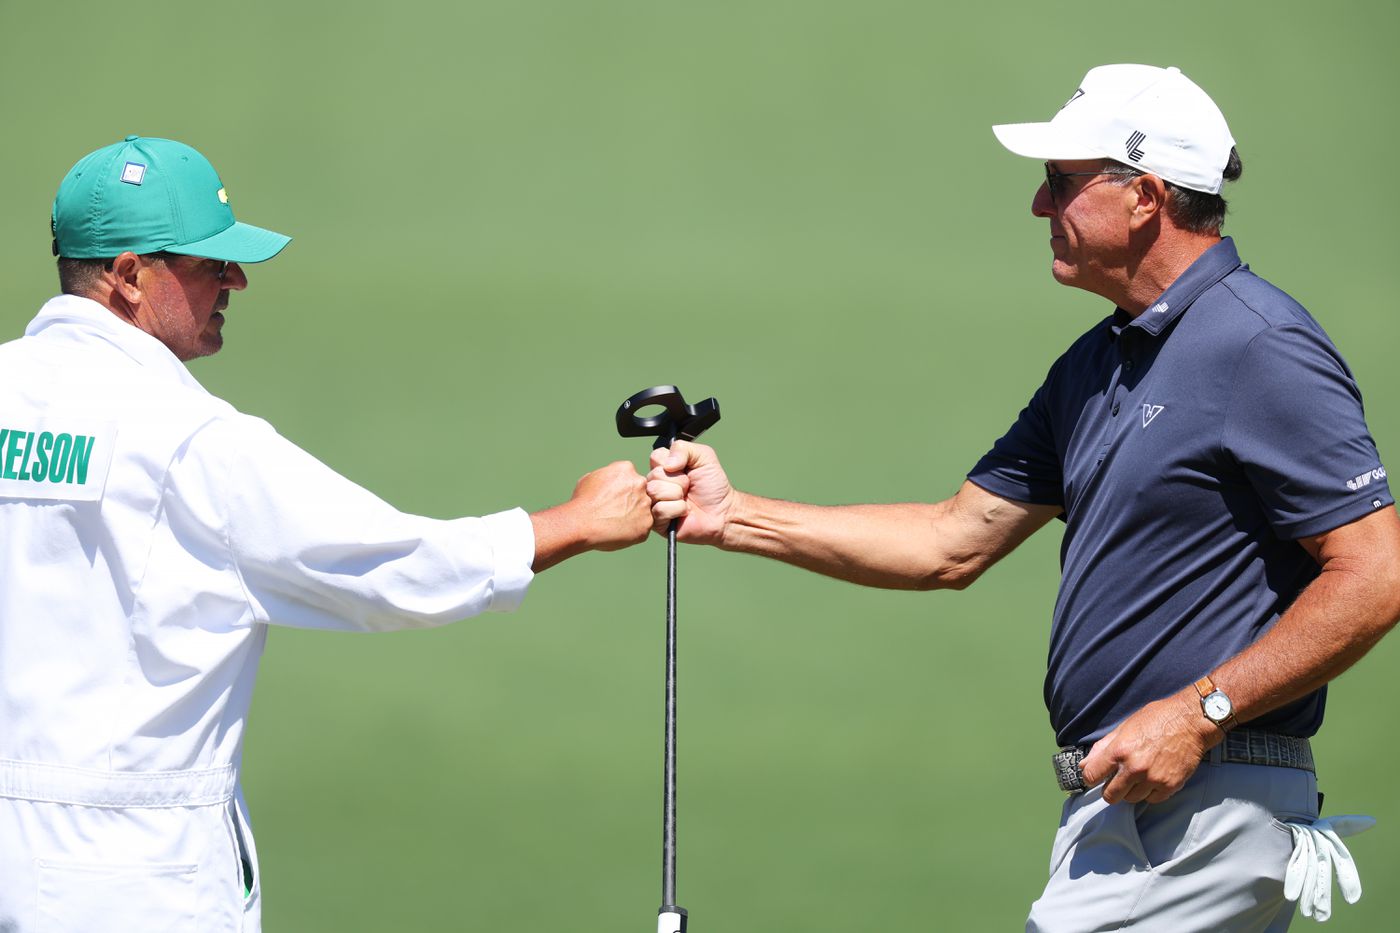 phil mickelson dishes details of pga tour ruling with iron fist, being “shot down”